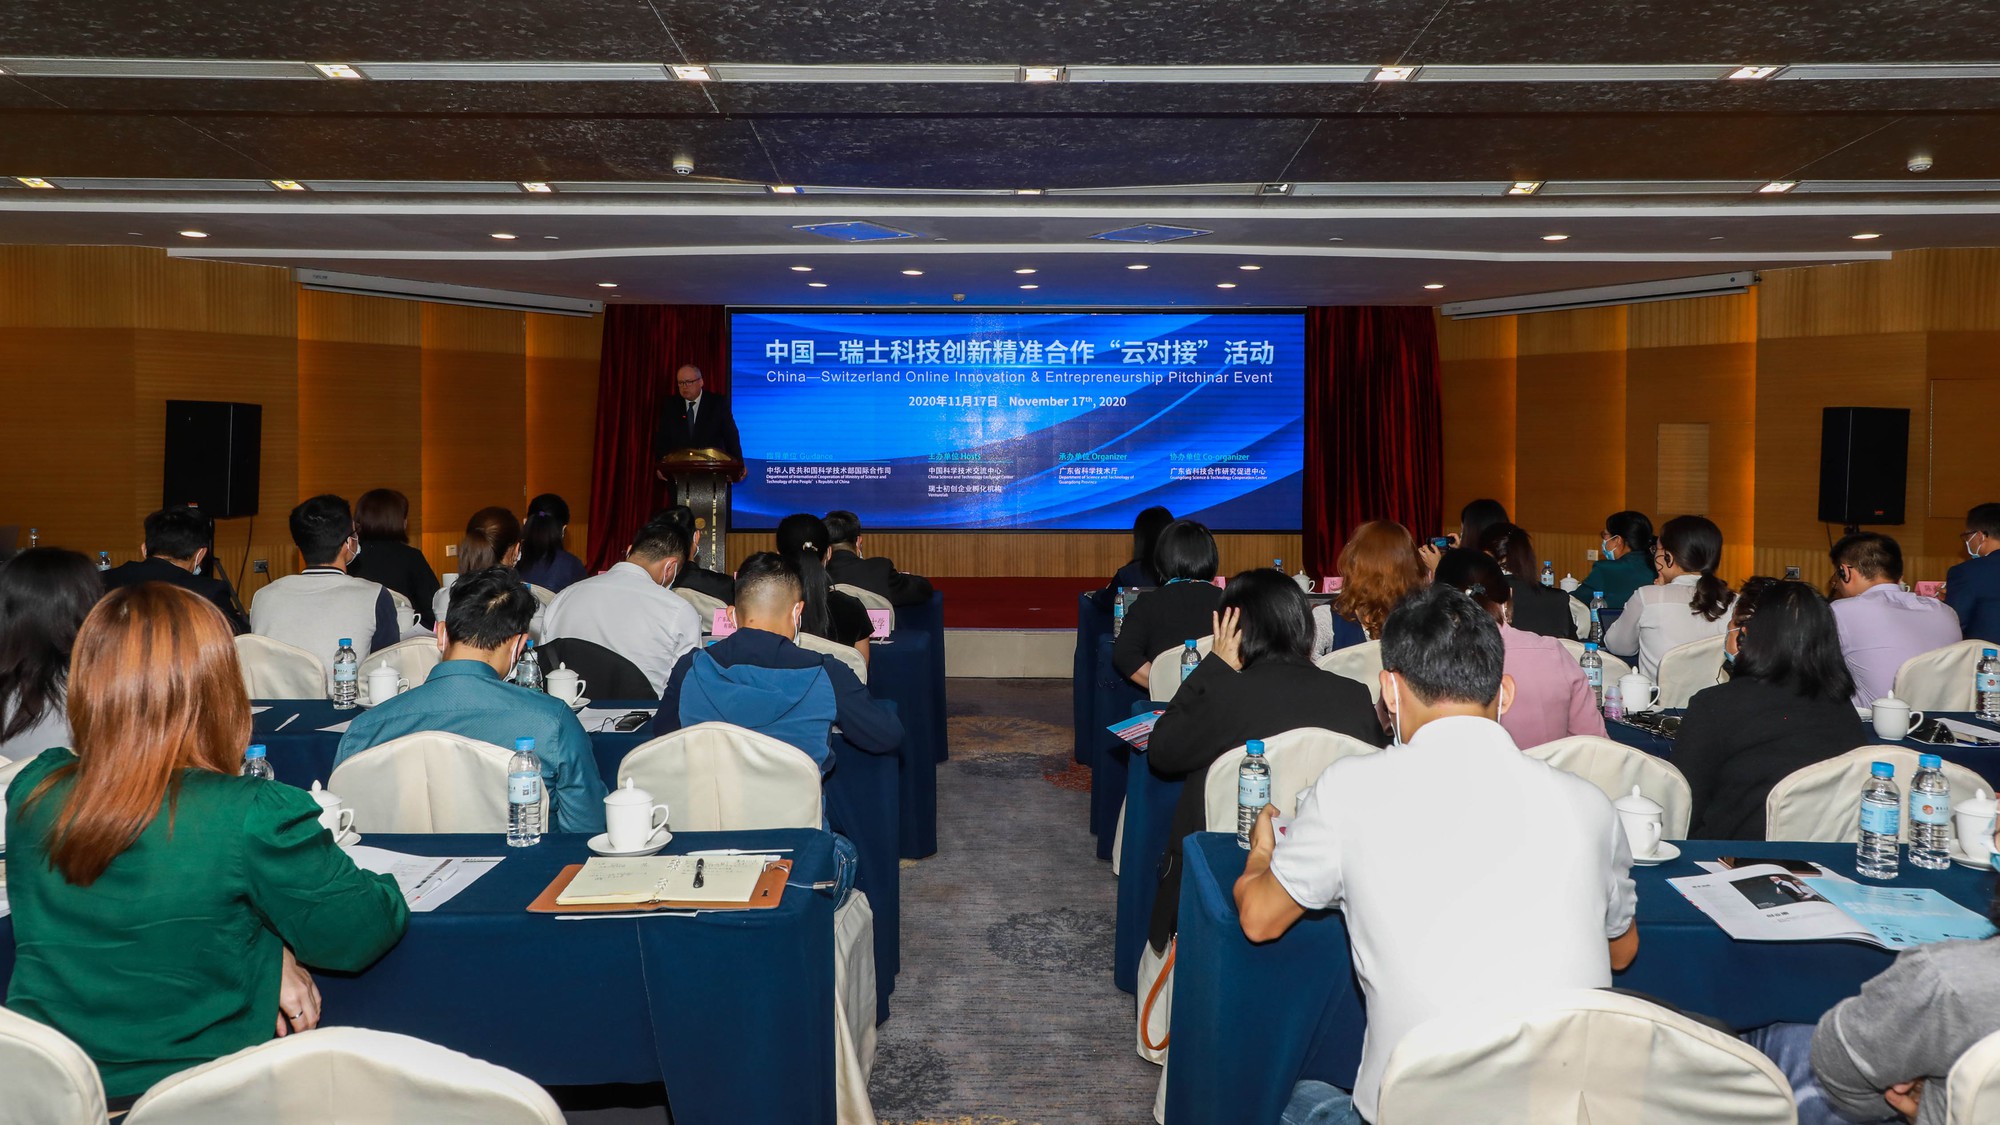 Mr. Martin Bienz, Consul General of Switzerland in Guangzhou, addressing the 2nd Sino-Swiss Pitchinar at the offline venue in Guangzhou. Photo credit: Guangdong Science and Technology Commission